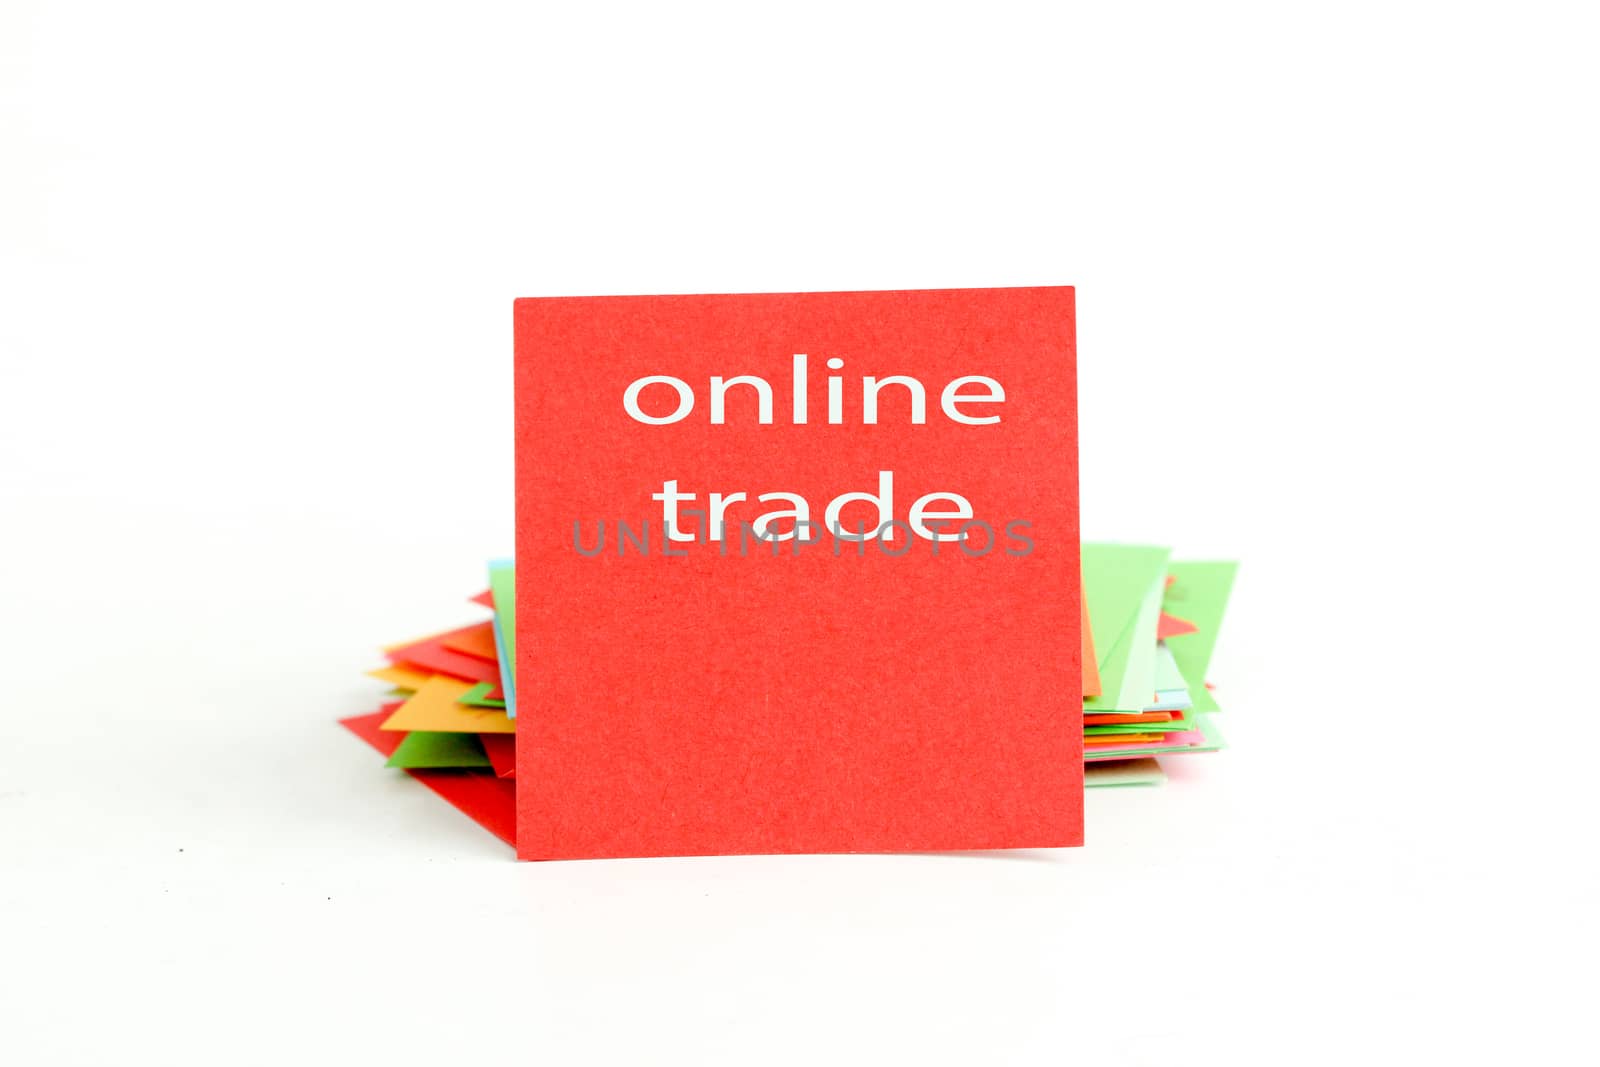 picture of a red note paper with text online trade